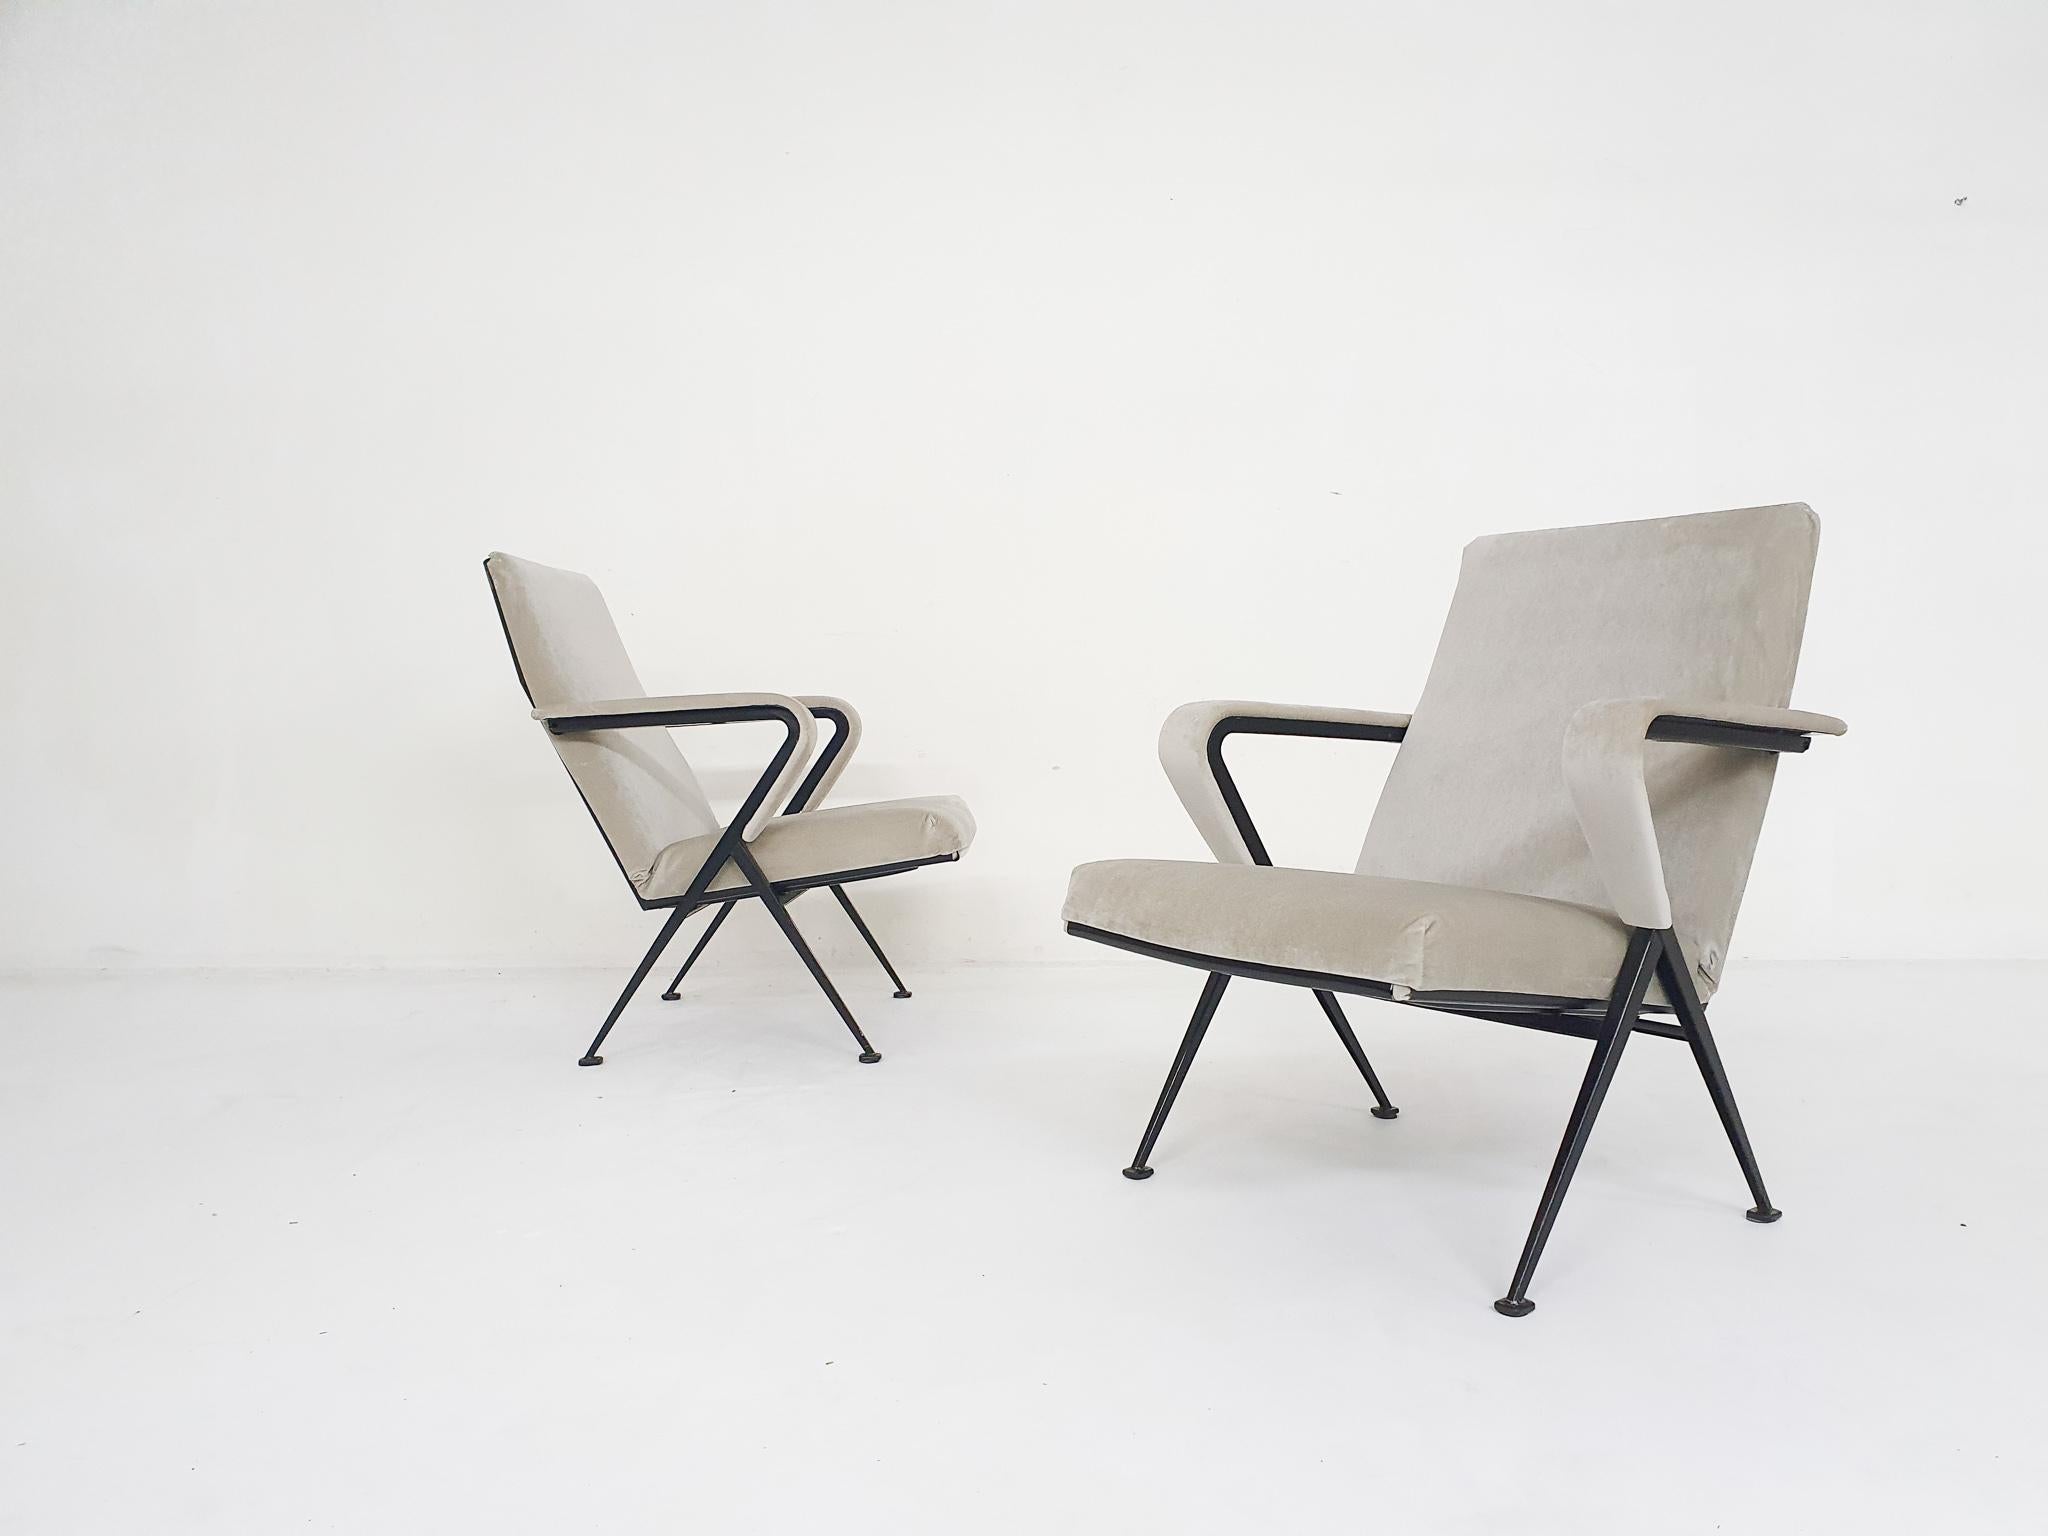 Black metal lounge chairs with new beige velvet upholstery. Designed by the Dutch Designer Friso Kramer for Ahrend de Cirkel in 1959.
The frame has some signs of use like scratches.

Friso Kramer
Kramer is the son of architect Piet Kramer. In 1963